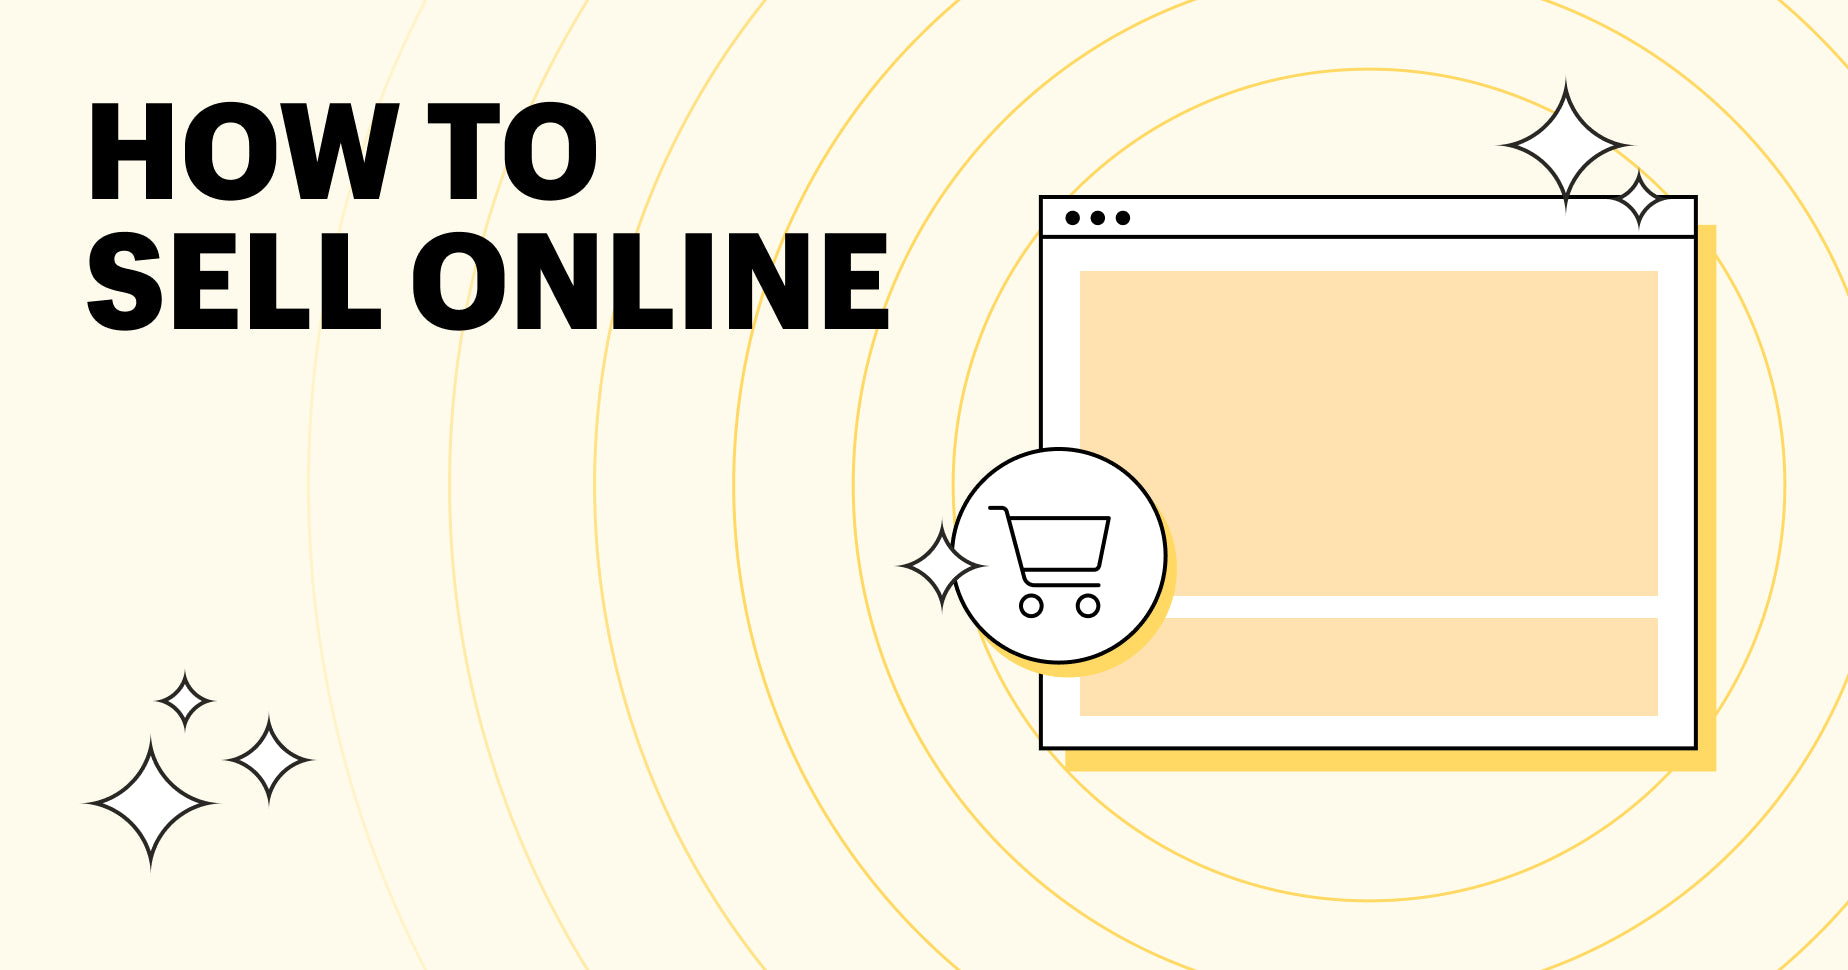 How To Sell Online: Step-by-Step Guide